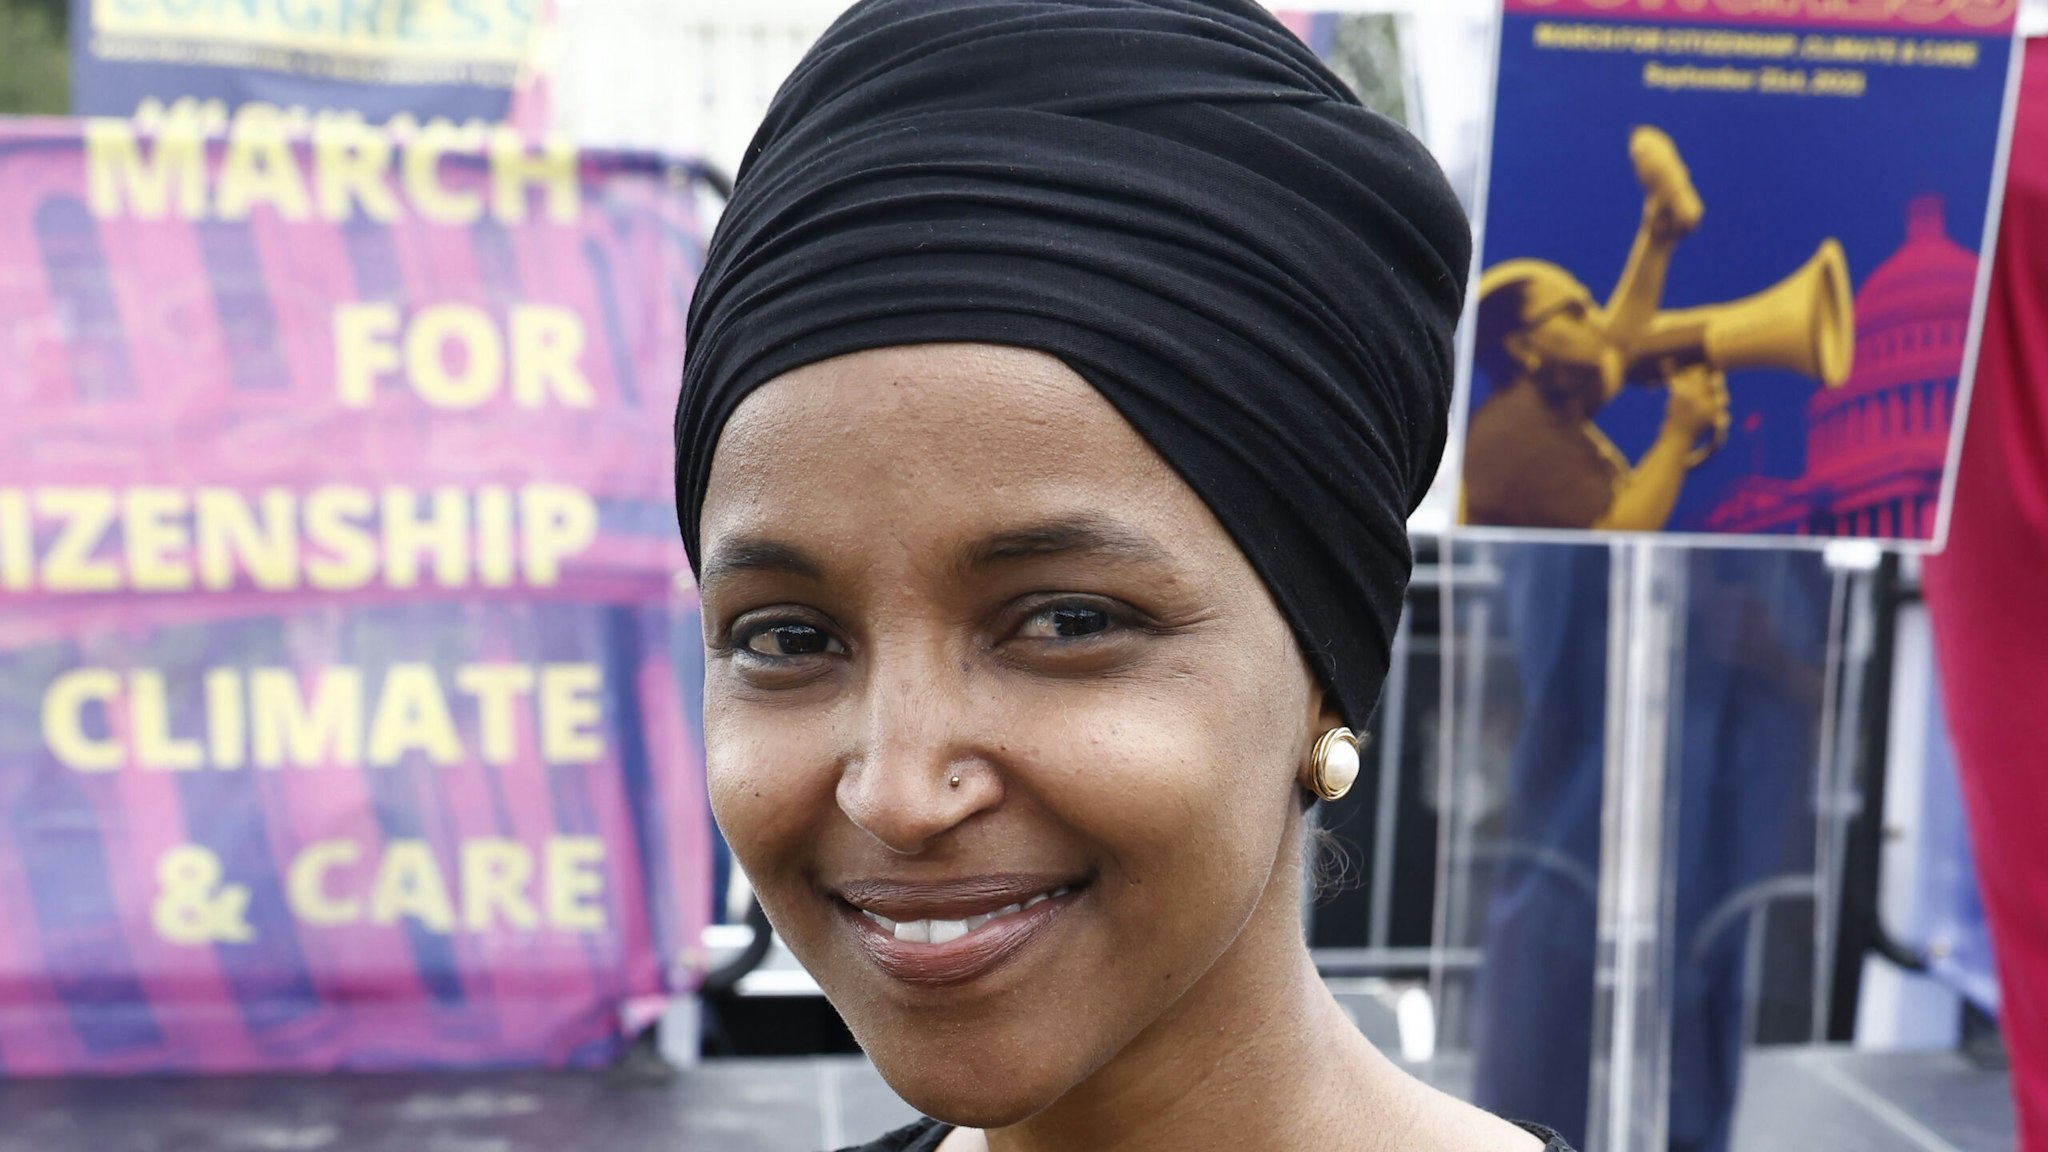 WASHINGTON, DC - SEPTEMBER 21: U.S. Rep. Ilhan Omar (D-MN) is seen backstage as thousands welcome back Congress by marching for Citizenship, Care, And Climate Justice on September 21, 2021 in Washington, DC.